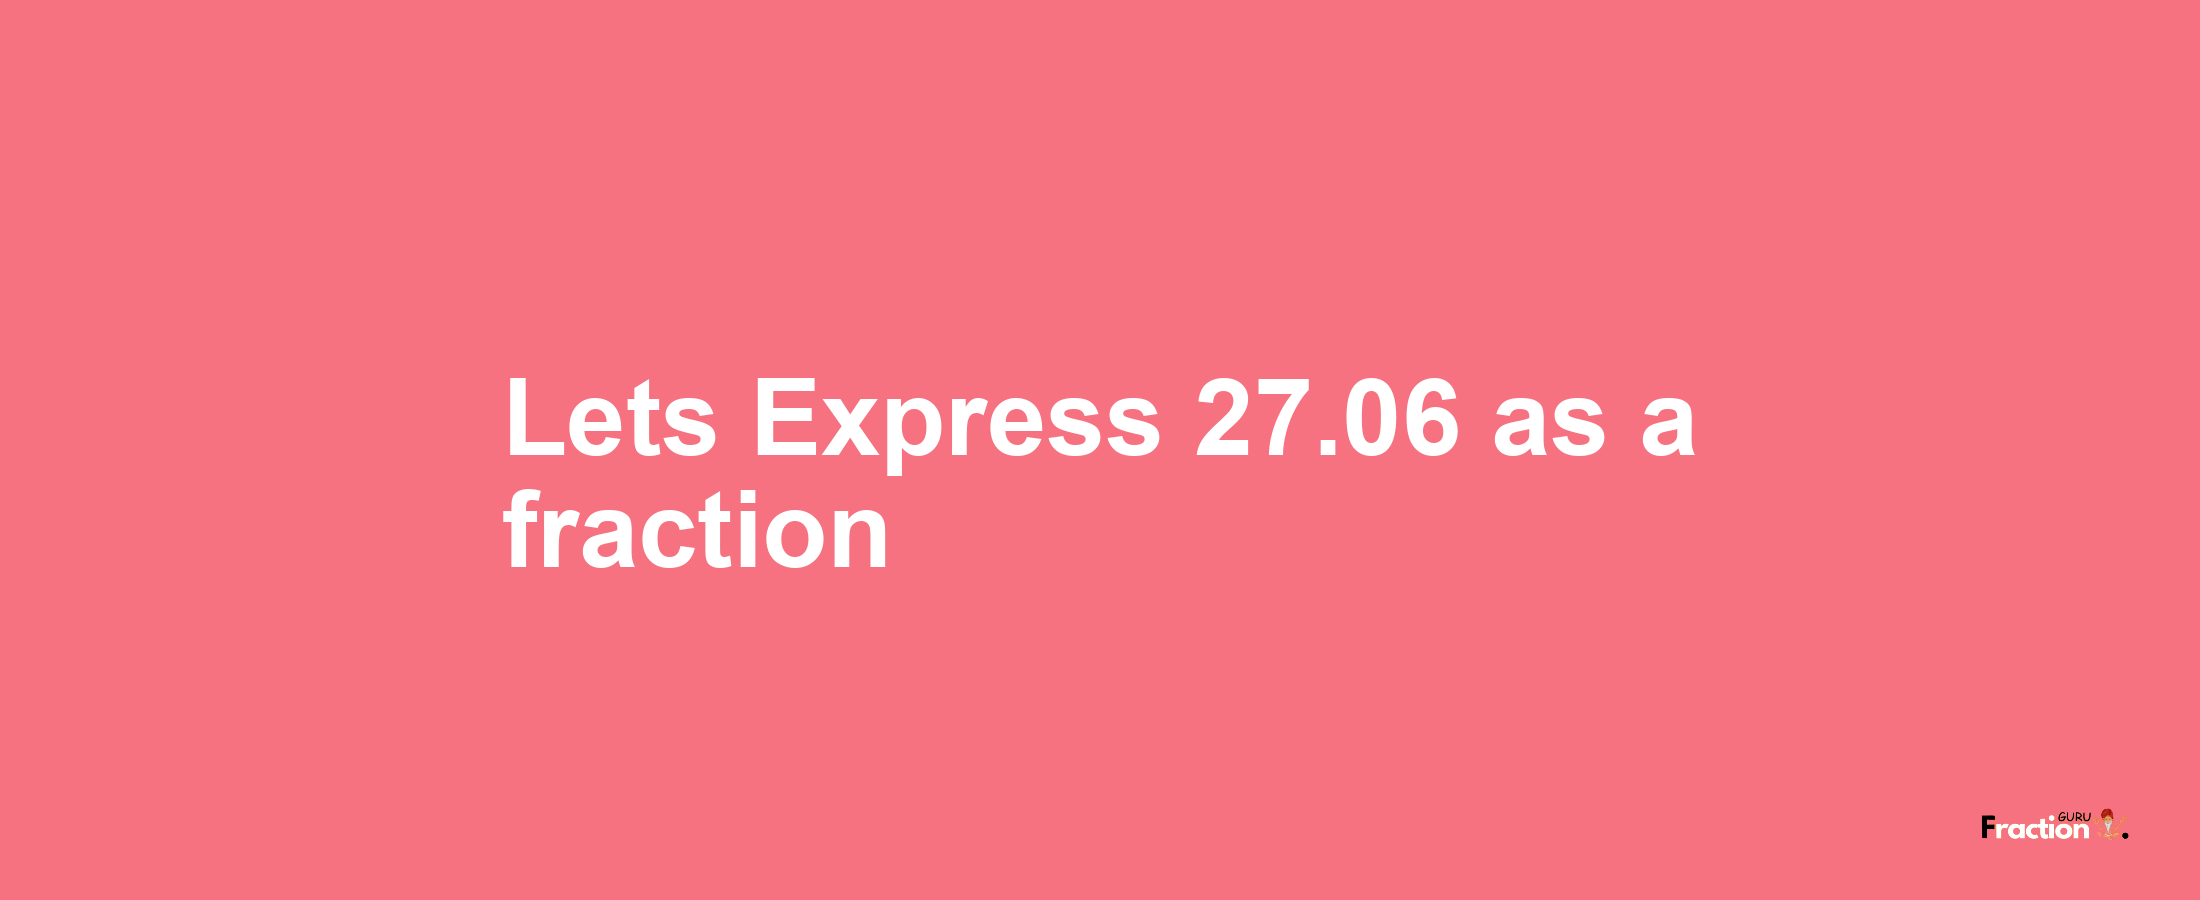 Lets Express 27.06 as afraction